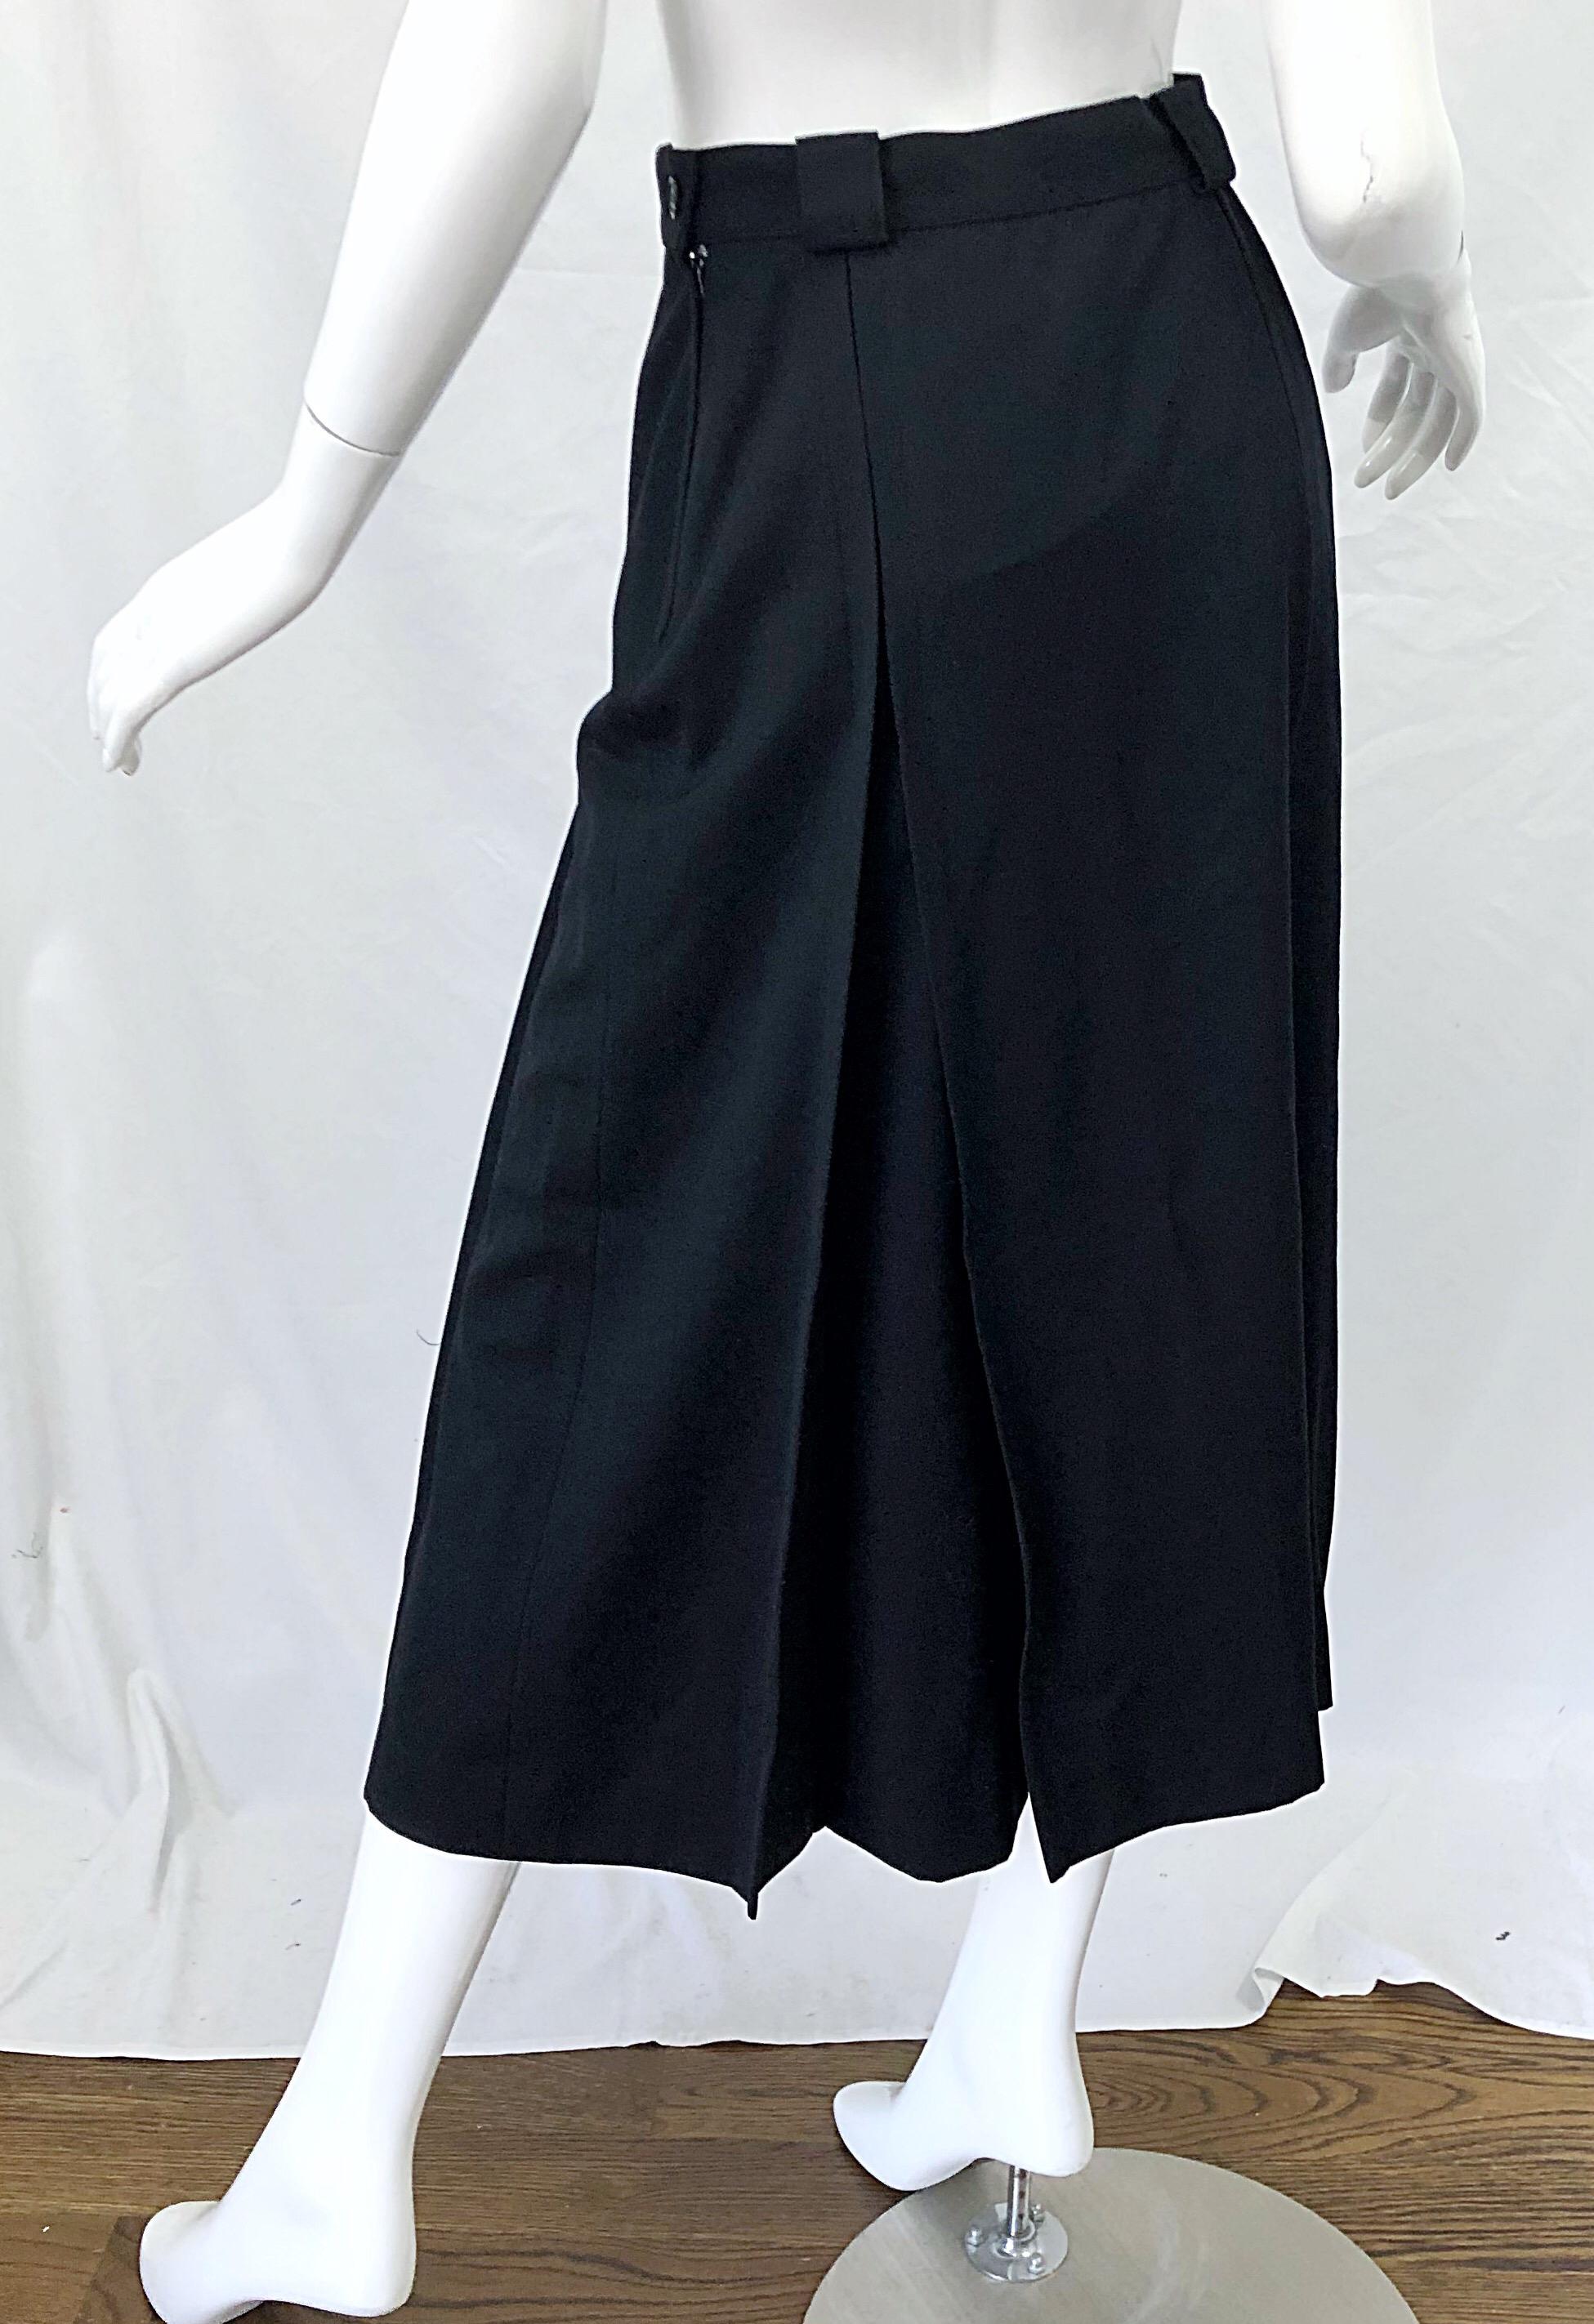 size 42 in us women's clothing